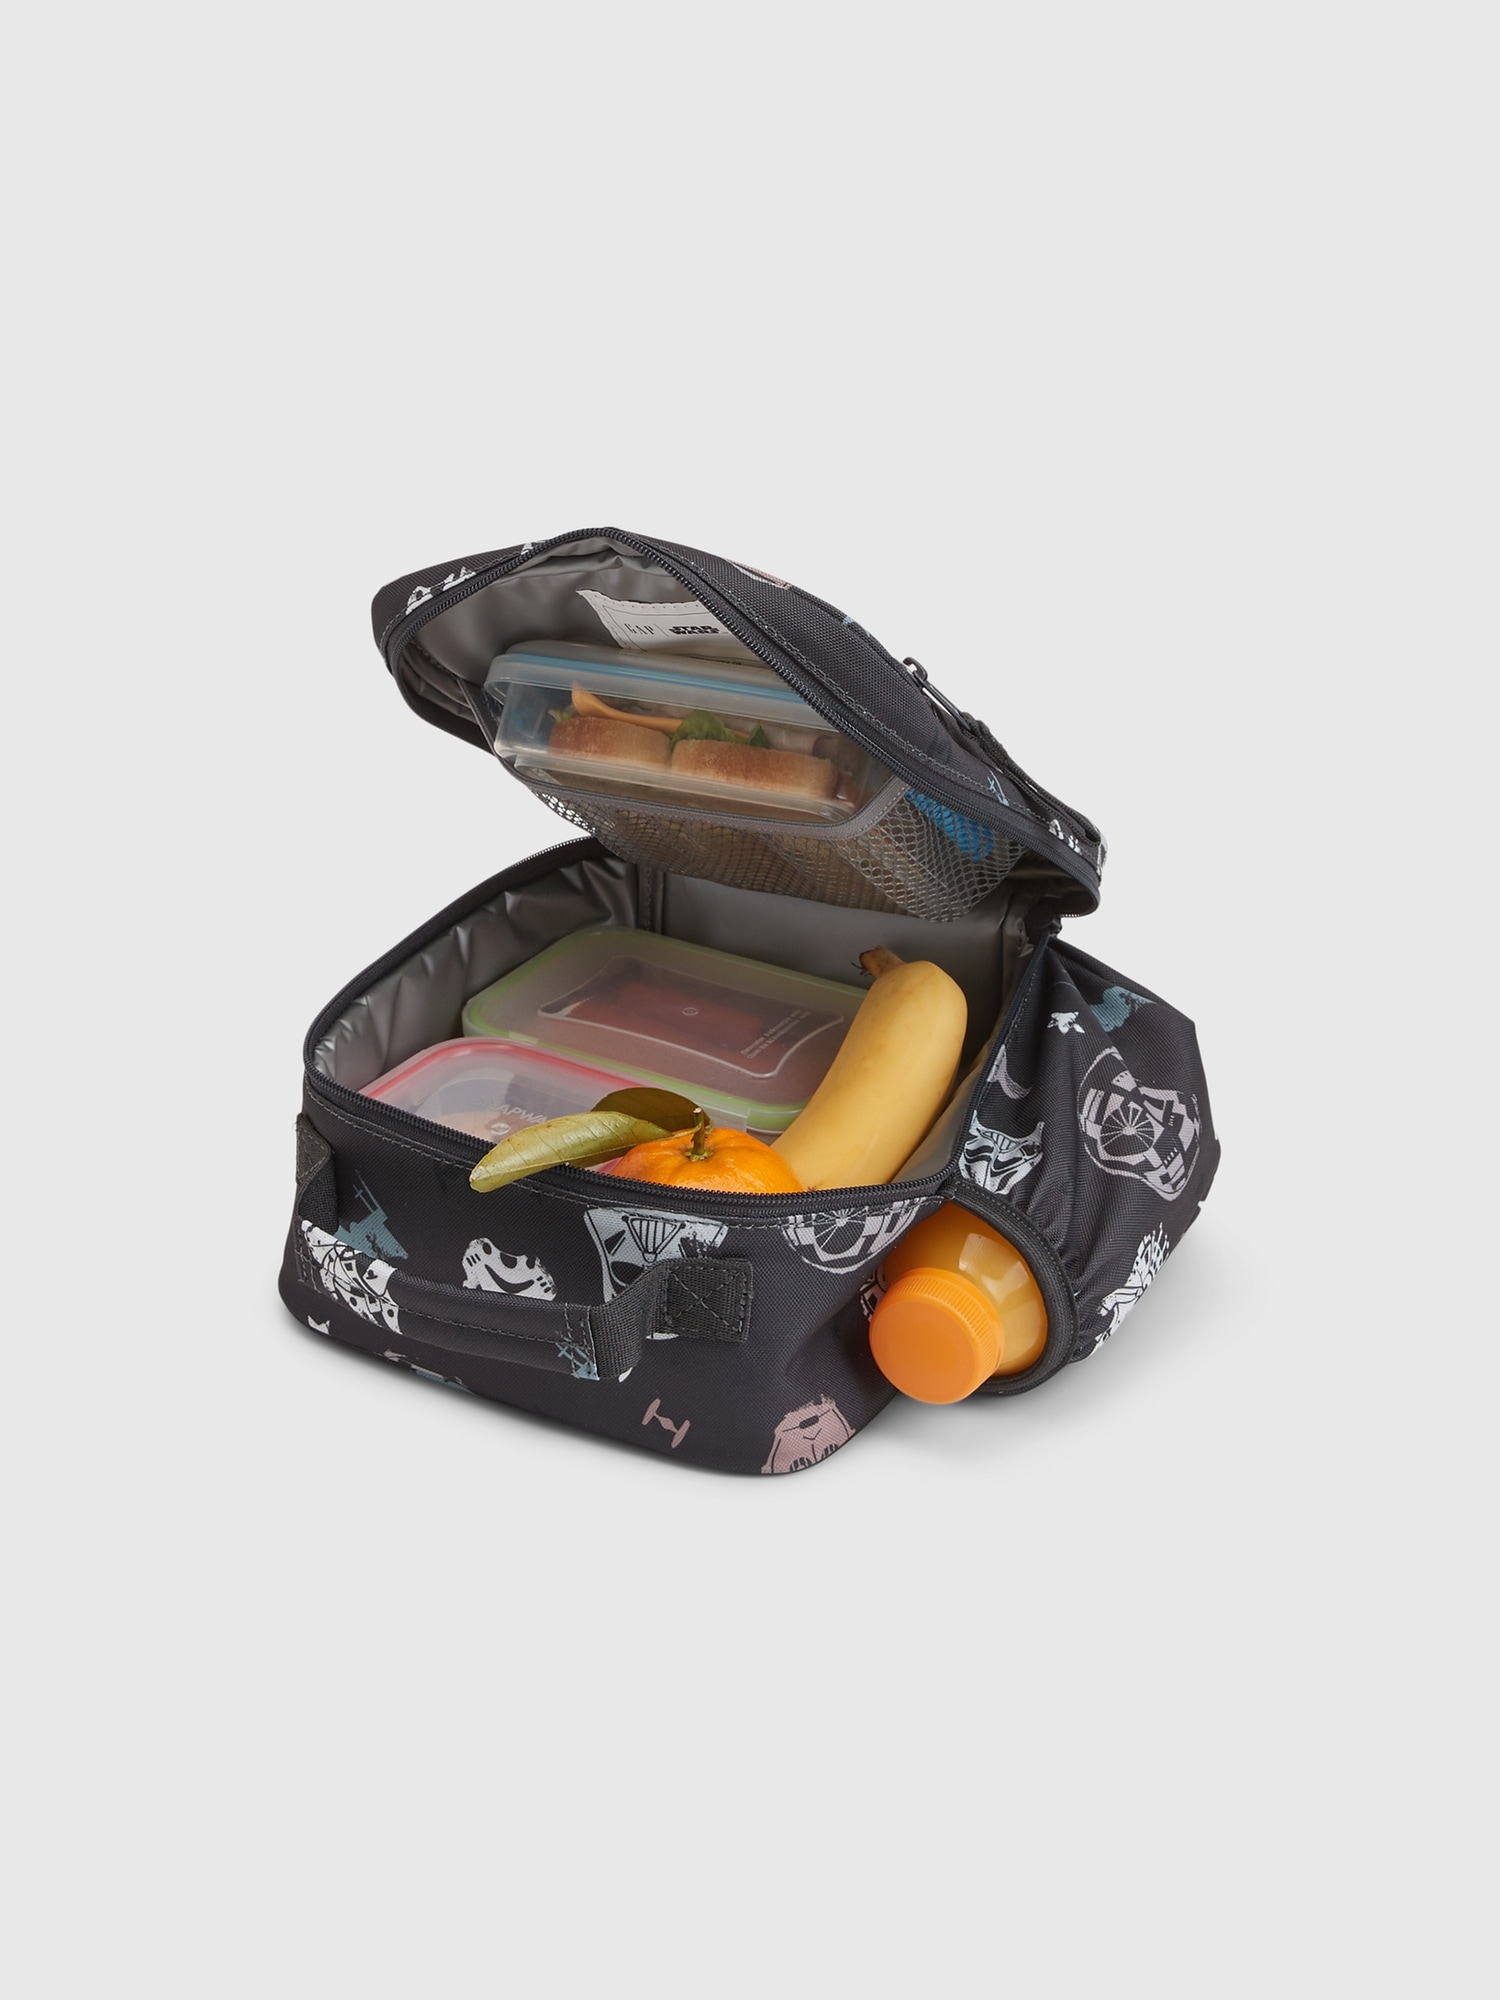 Star Wars Lunch Boxes, Lunch Bags, Lunch Totes